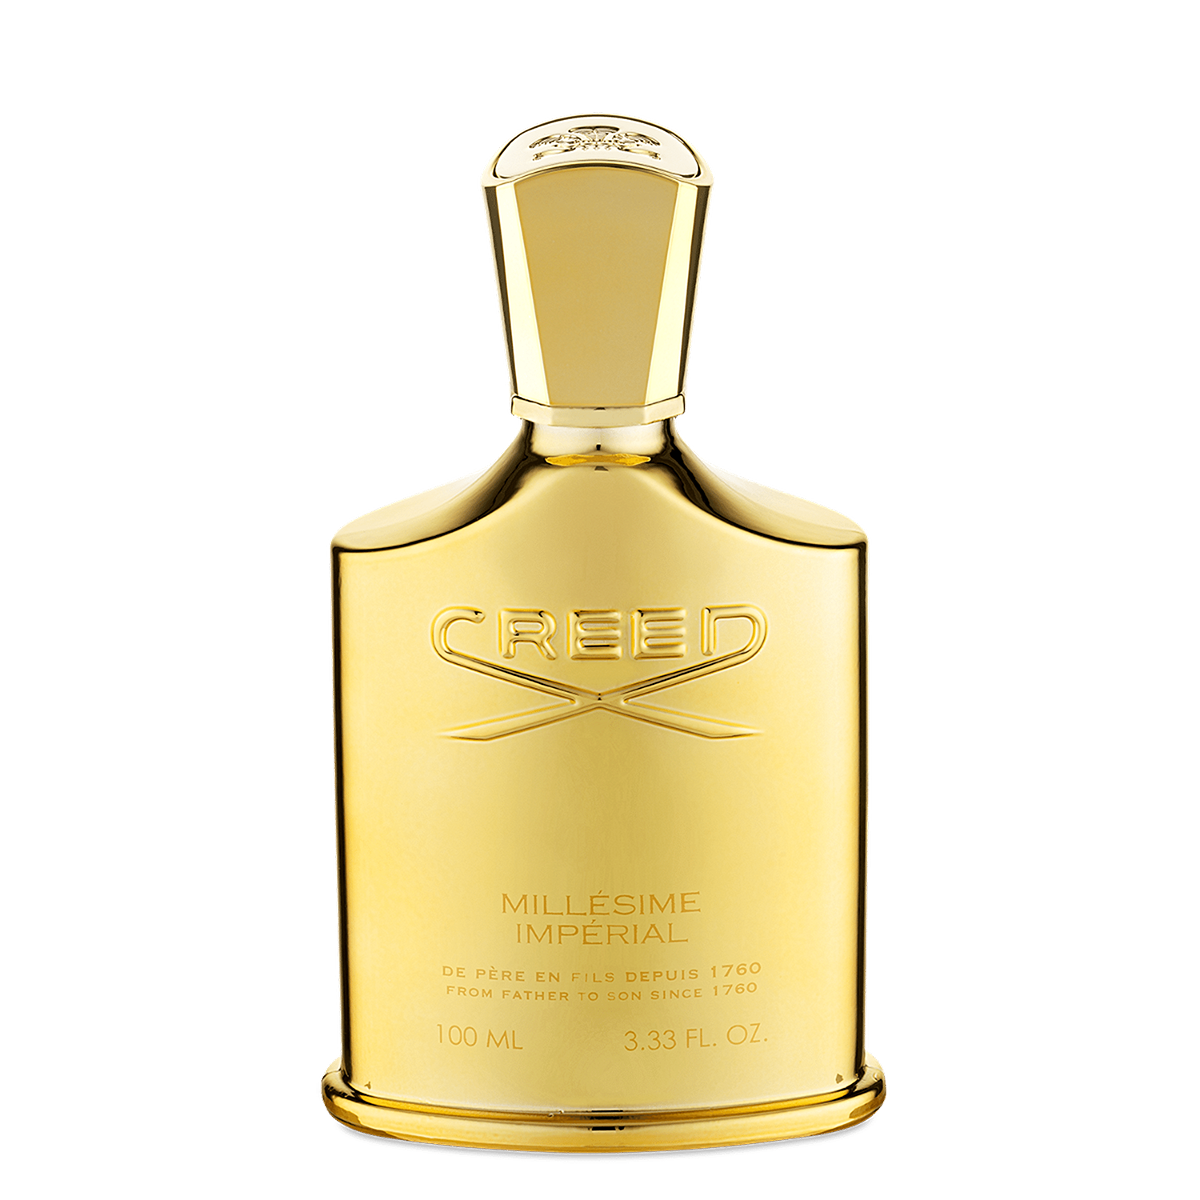 A Millesime Imperial 100ml bottle of Creed signature perfume on a white background.